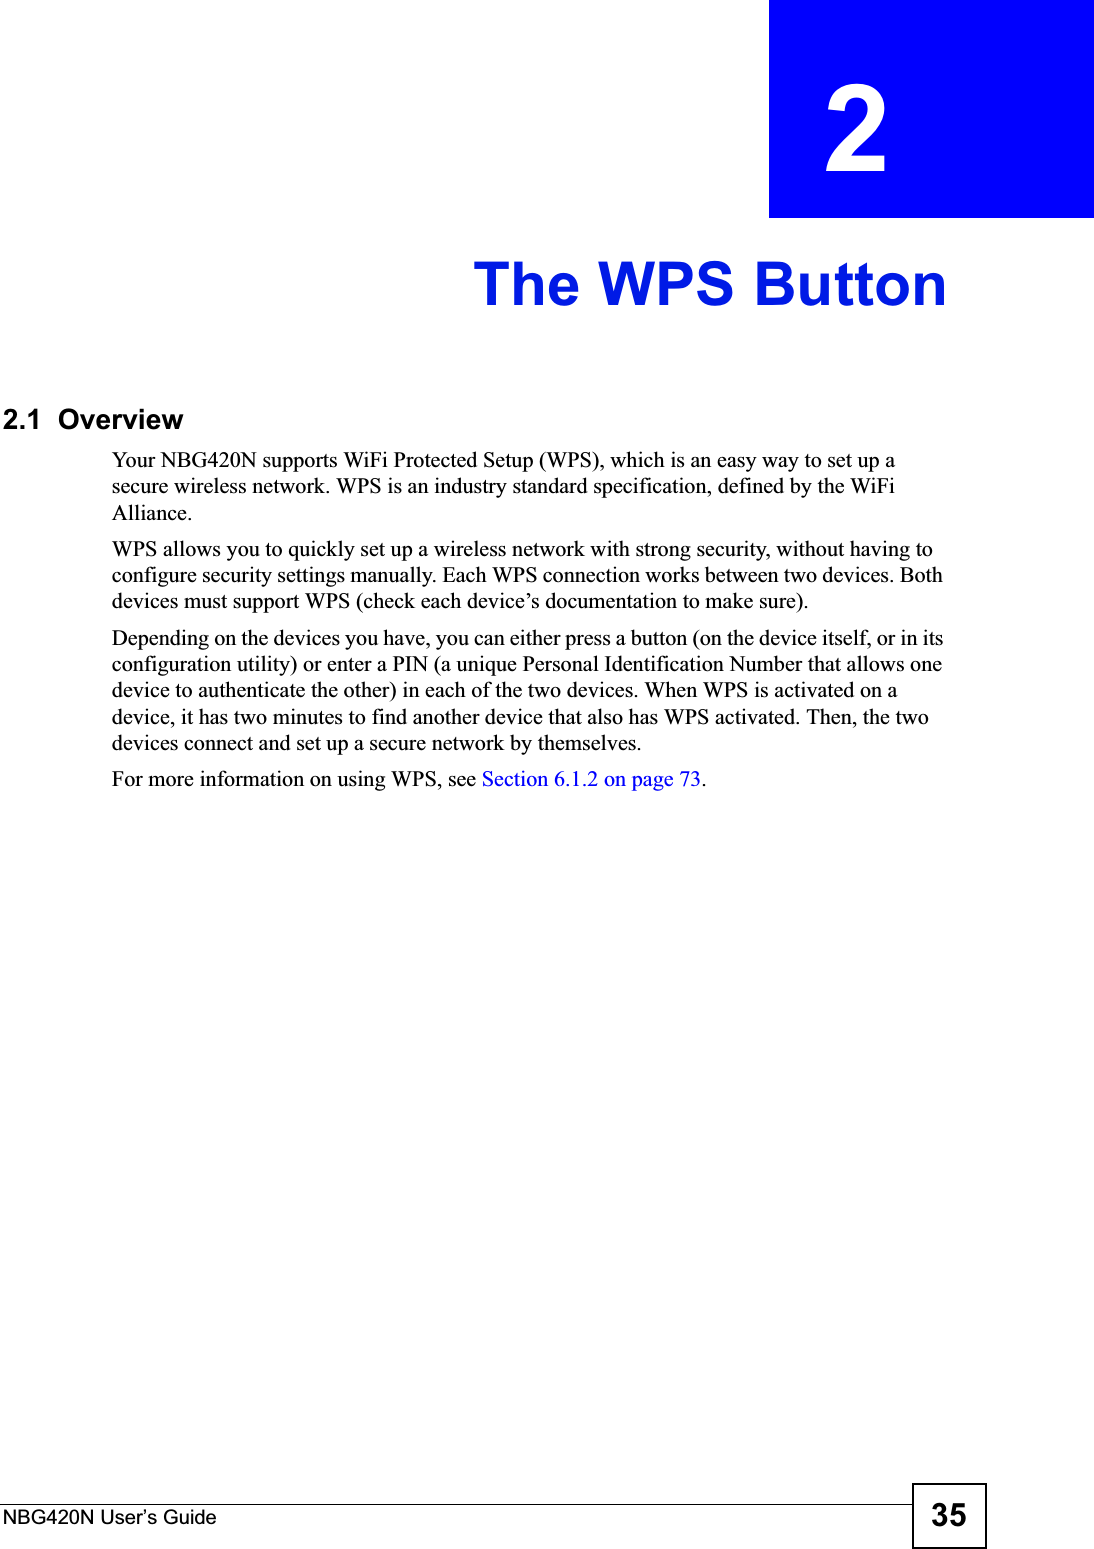 NBG420N User’s Guide 35CHAPTER  2 The WPS Button2.1  OverviewYour NBG420N supports WiFi Protected Setup (WPS), which is an easy way to set up a secure wireless network. WPS is an industry standard specification, defined by the WiFi Alliance.WPS allows you to quickly set up a wireless network with strong security, without having to configure security settings manually. Each WPS connection works between two devices. Both devices must support WPS (check each device’s documentation to make sure). Depending on the devices you have, you can either press a button (on the device itself, or in its configuration utility) or enter a PIN (a unique Personal Identification Number that allows one device to authenticate the other) in each of the two devices. When WPS is activated on a device, it has two minutes to find another device that also has WPS activated. Then, the two devices connect and set up a secure network by themselves.For more information on using WPS, see Section 6.1.2 on page 73.